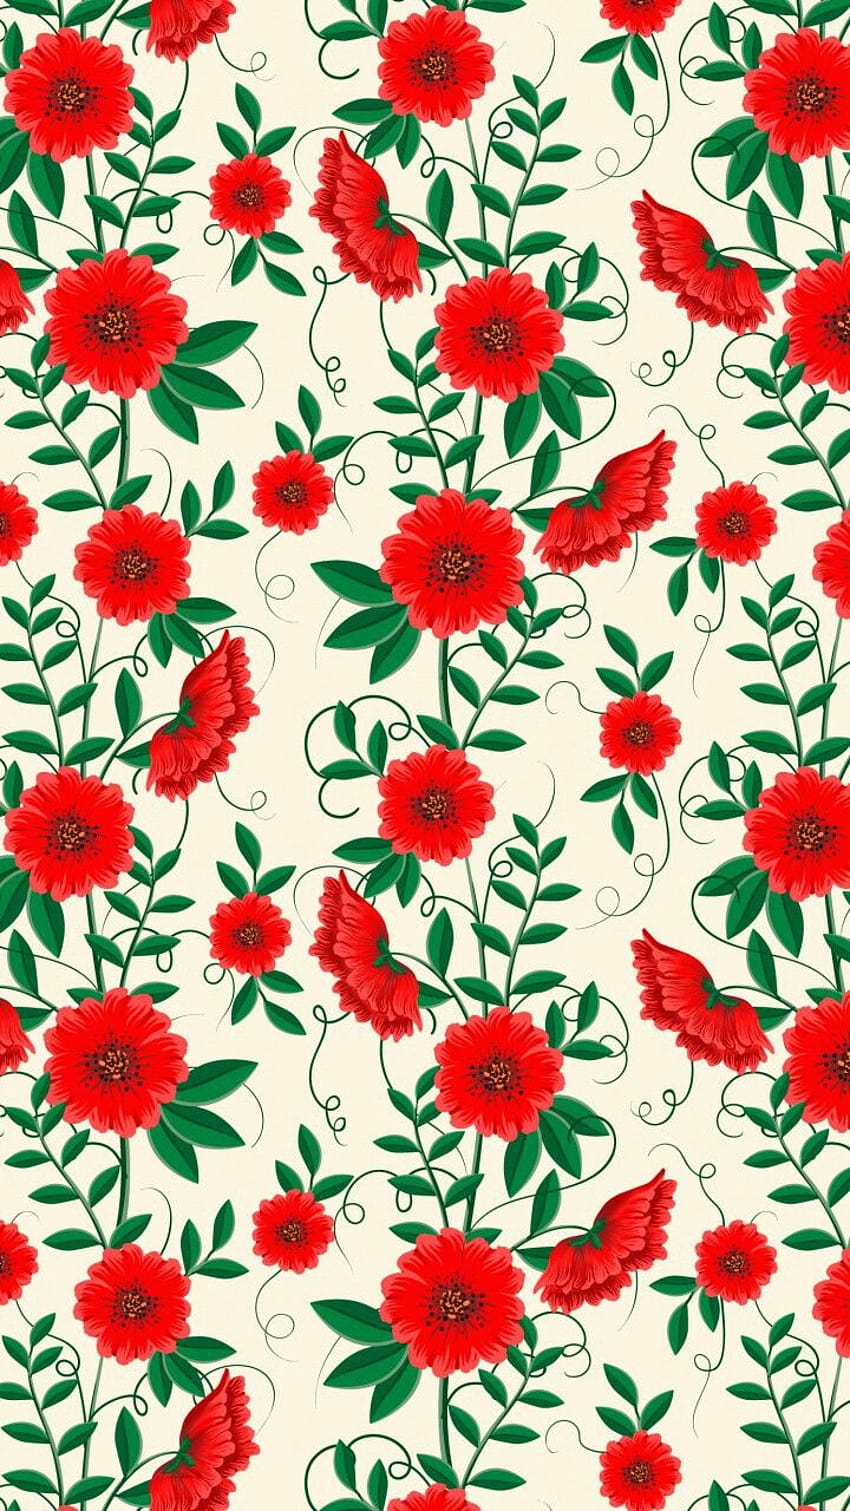 art, background, cartoon, colorful, colour, cute art, design, drawing, flora, flowers, green, illustration, iphone, kawaii, leaves, pastel, pattern, red, texture, vintage, watercolor, we heart it, flowers background, flowers pattern, kawaii vintage HD phone wallpaper